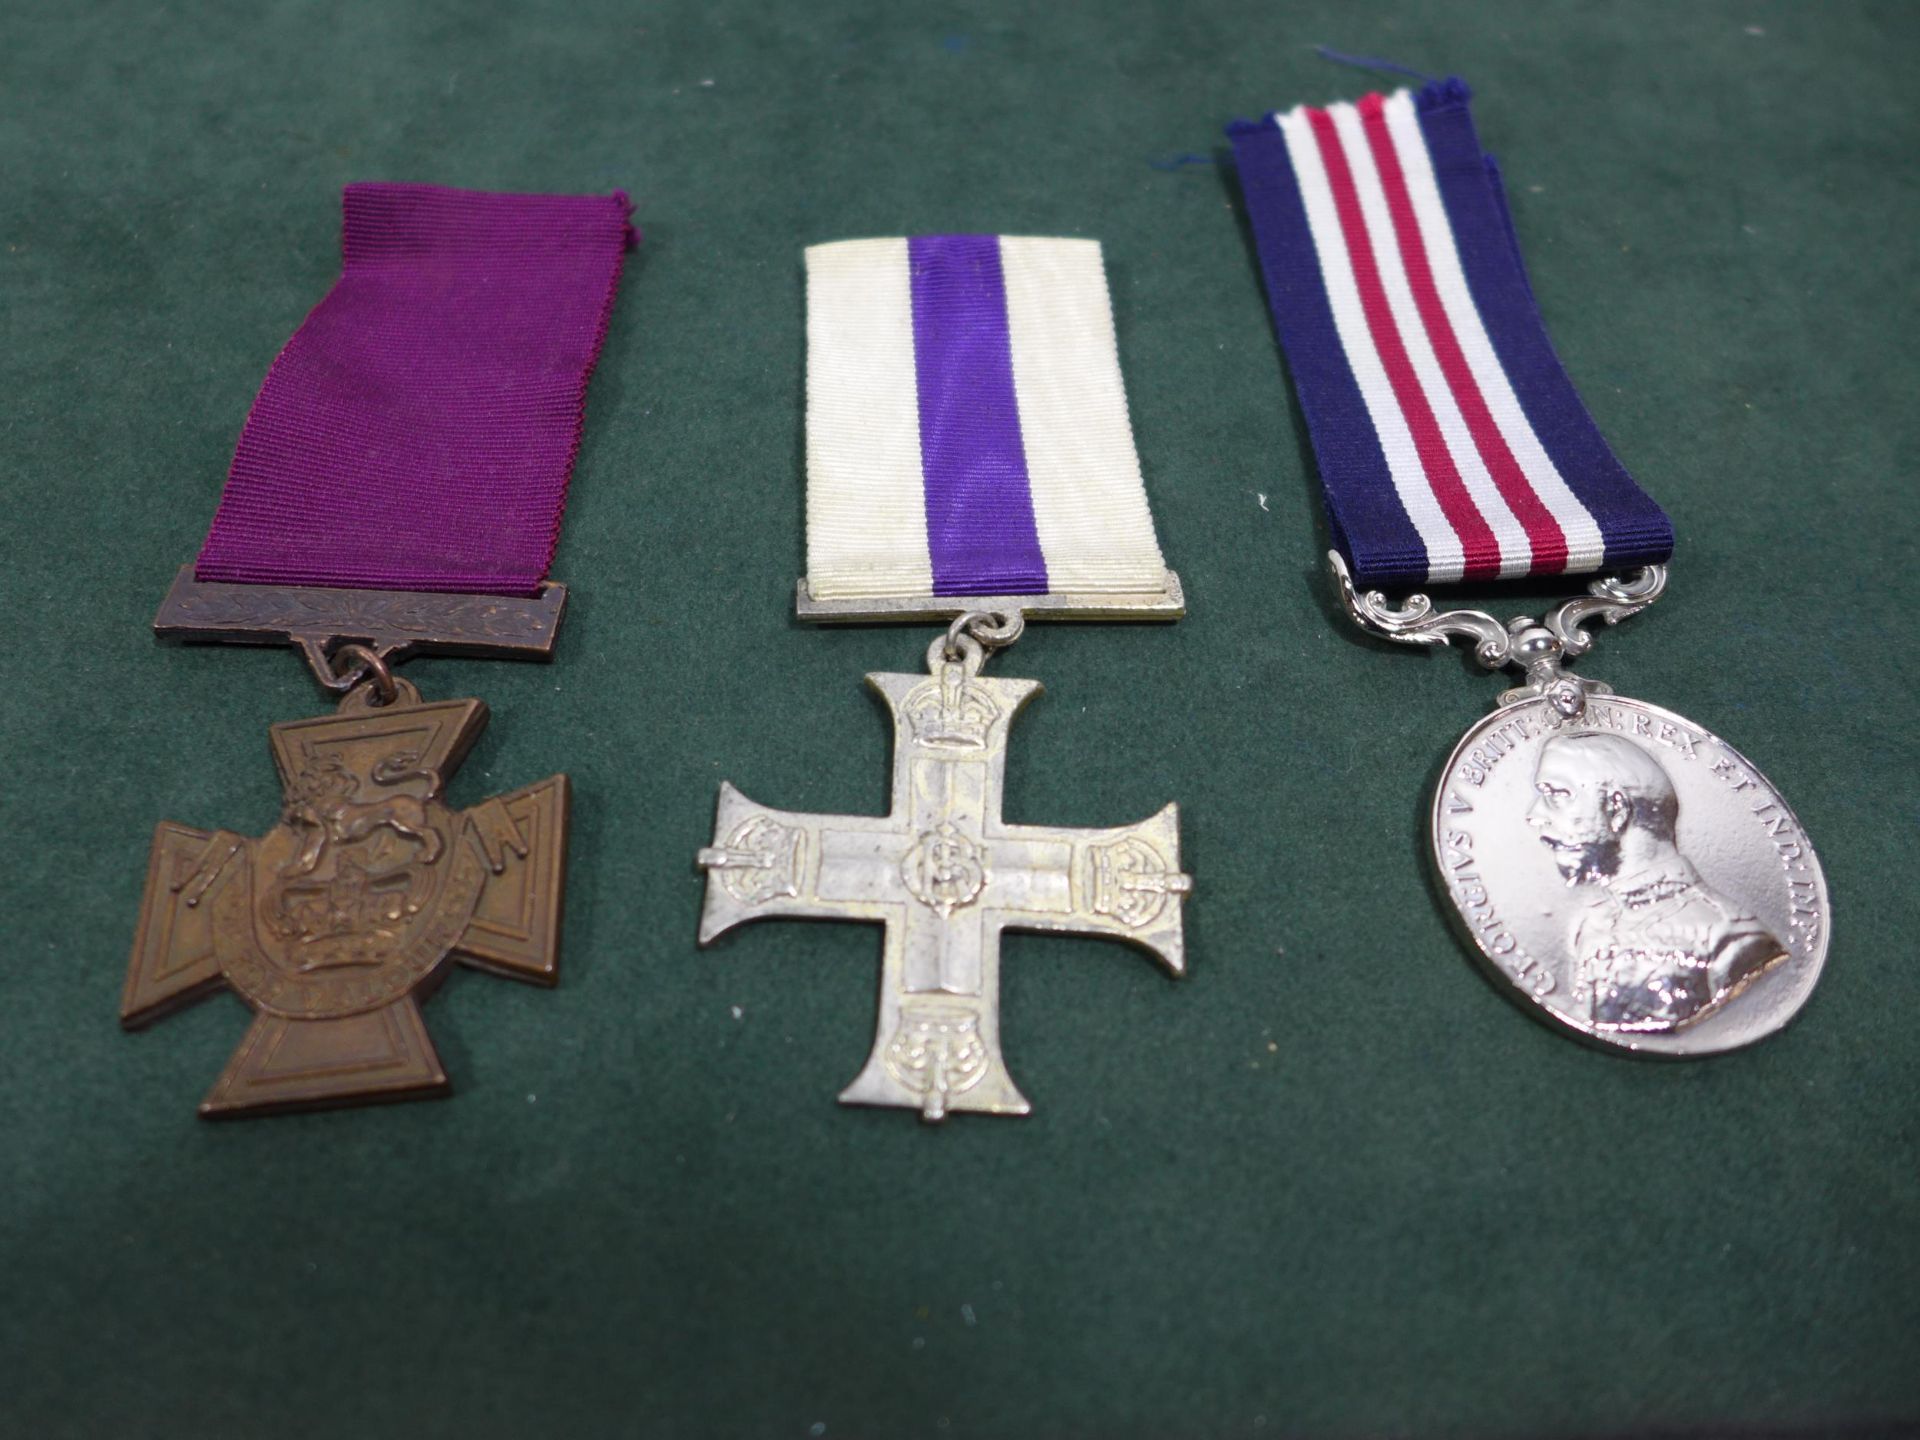 THREE REPLICA MEDALS, TO INCLUDE VICTORIA CROSS, MILITARY CROSS AND A MILITARY MEDAL